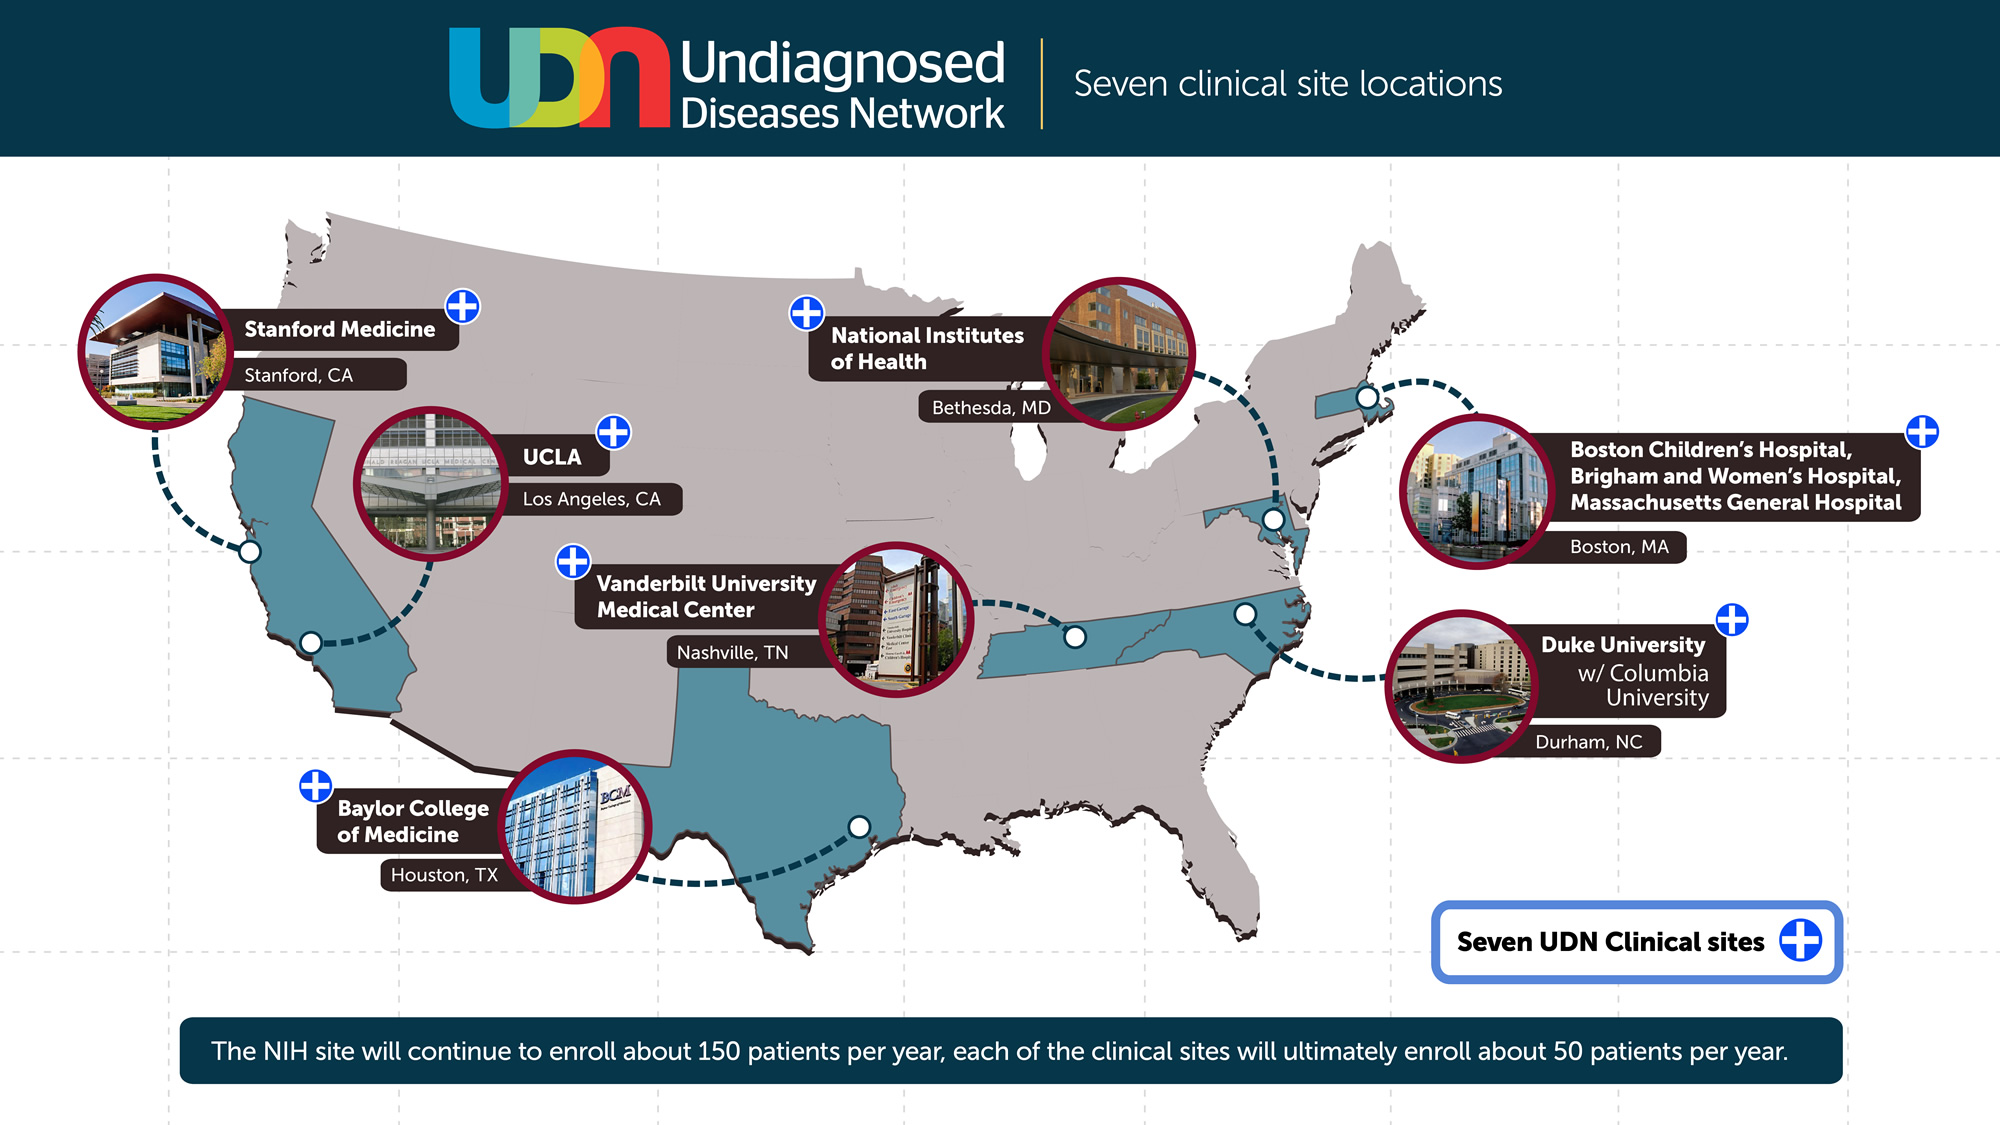 Map showing the seven clinical center locations of the Undiagnosed Diseases Network